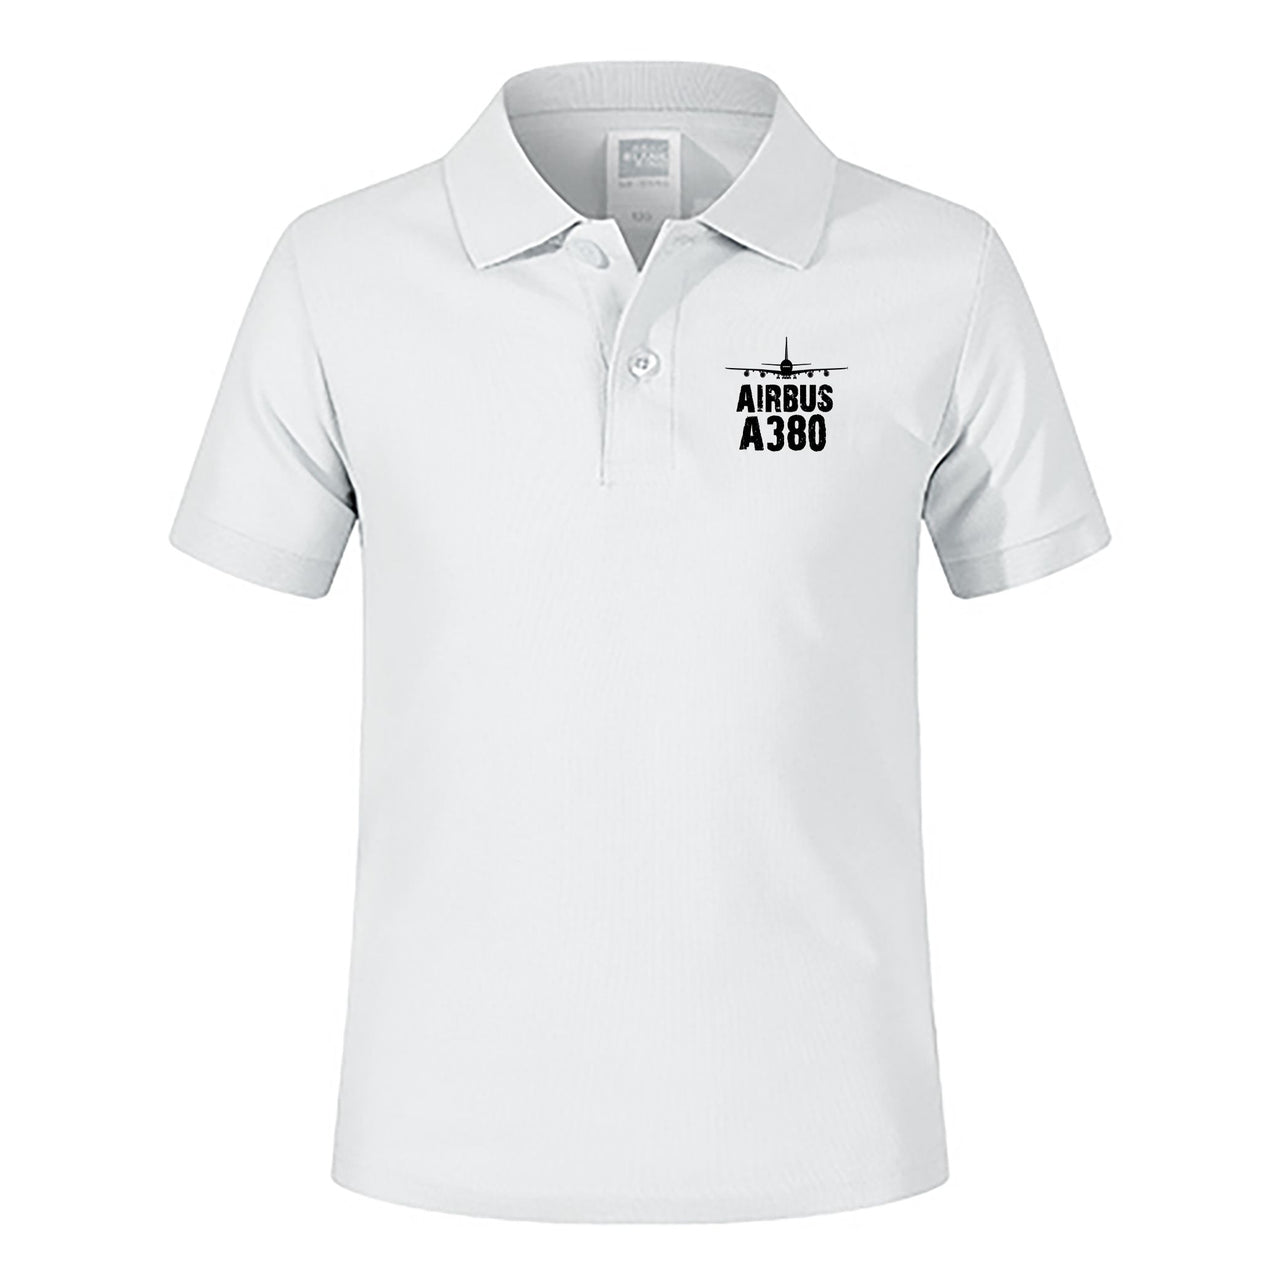 Airbus A380 & Plane Designed Children Polo T-Shirts